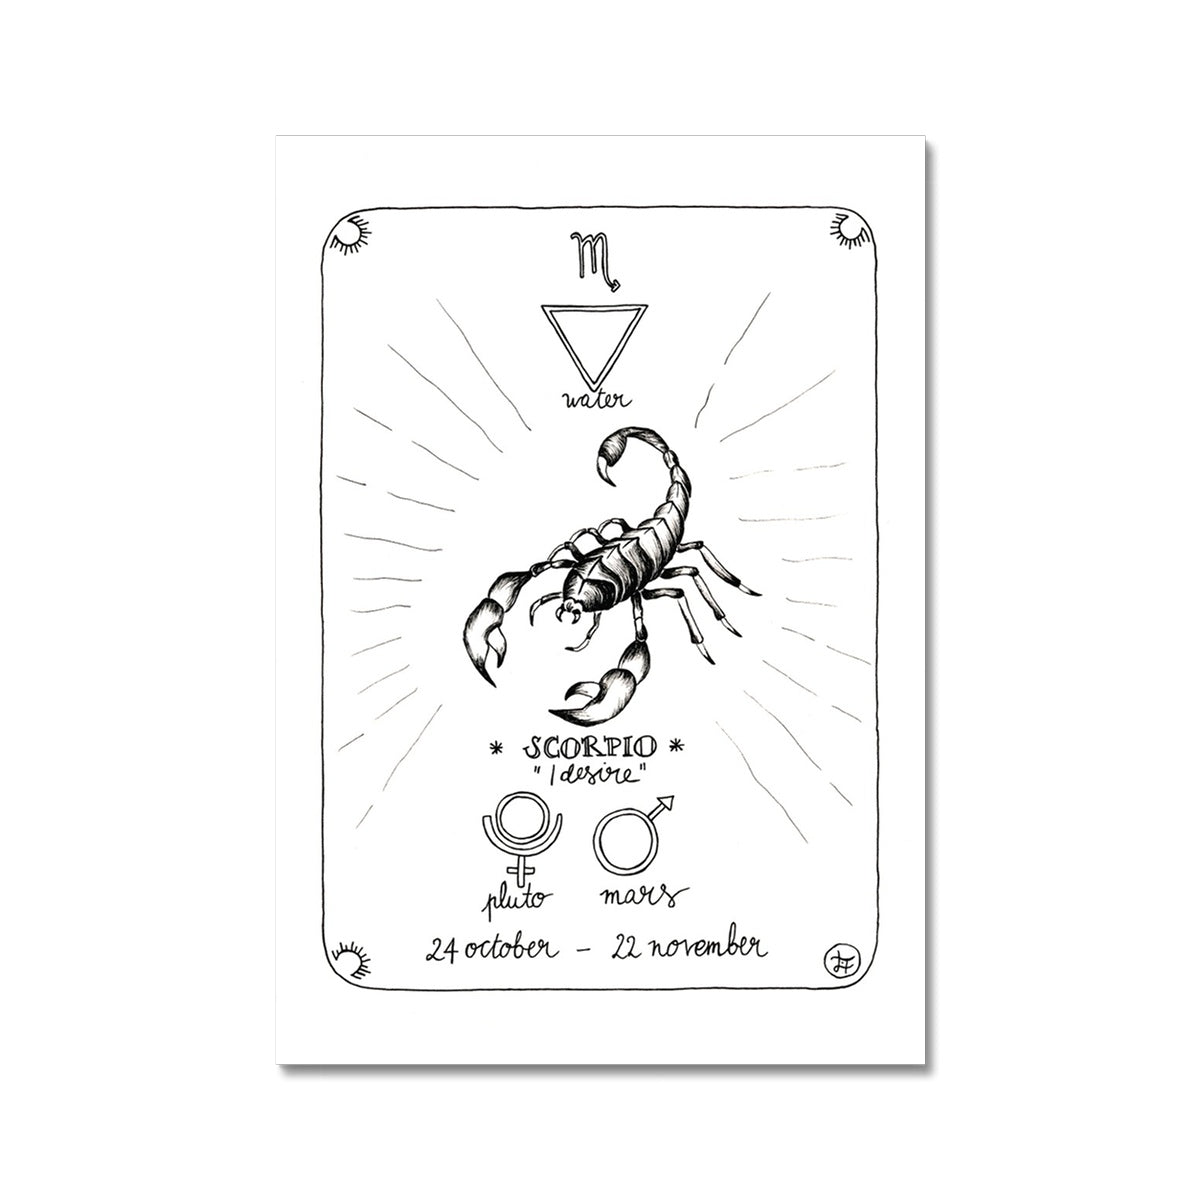 scorpio star sign, zodiac sign, dainty illustration in black ink, symbol of element water, symbols of planets mars and pluto, dates 24 october - 22 november, illustration of scorpion in the center, laurateodoriart